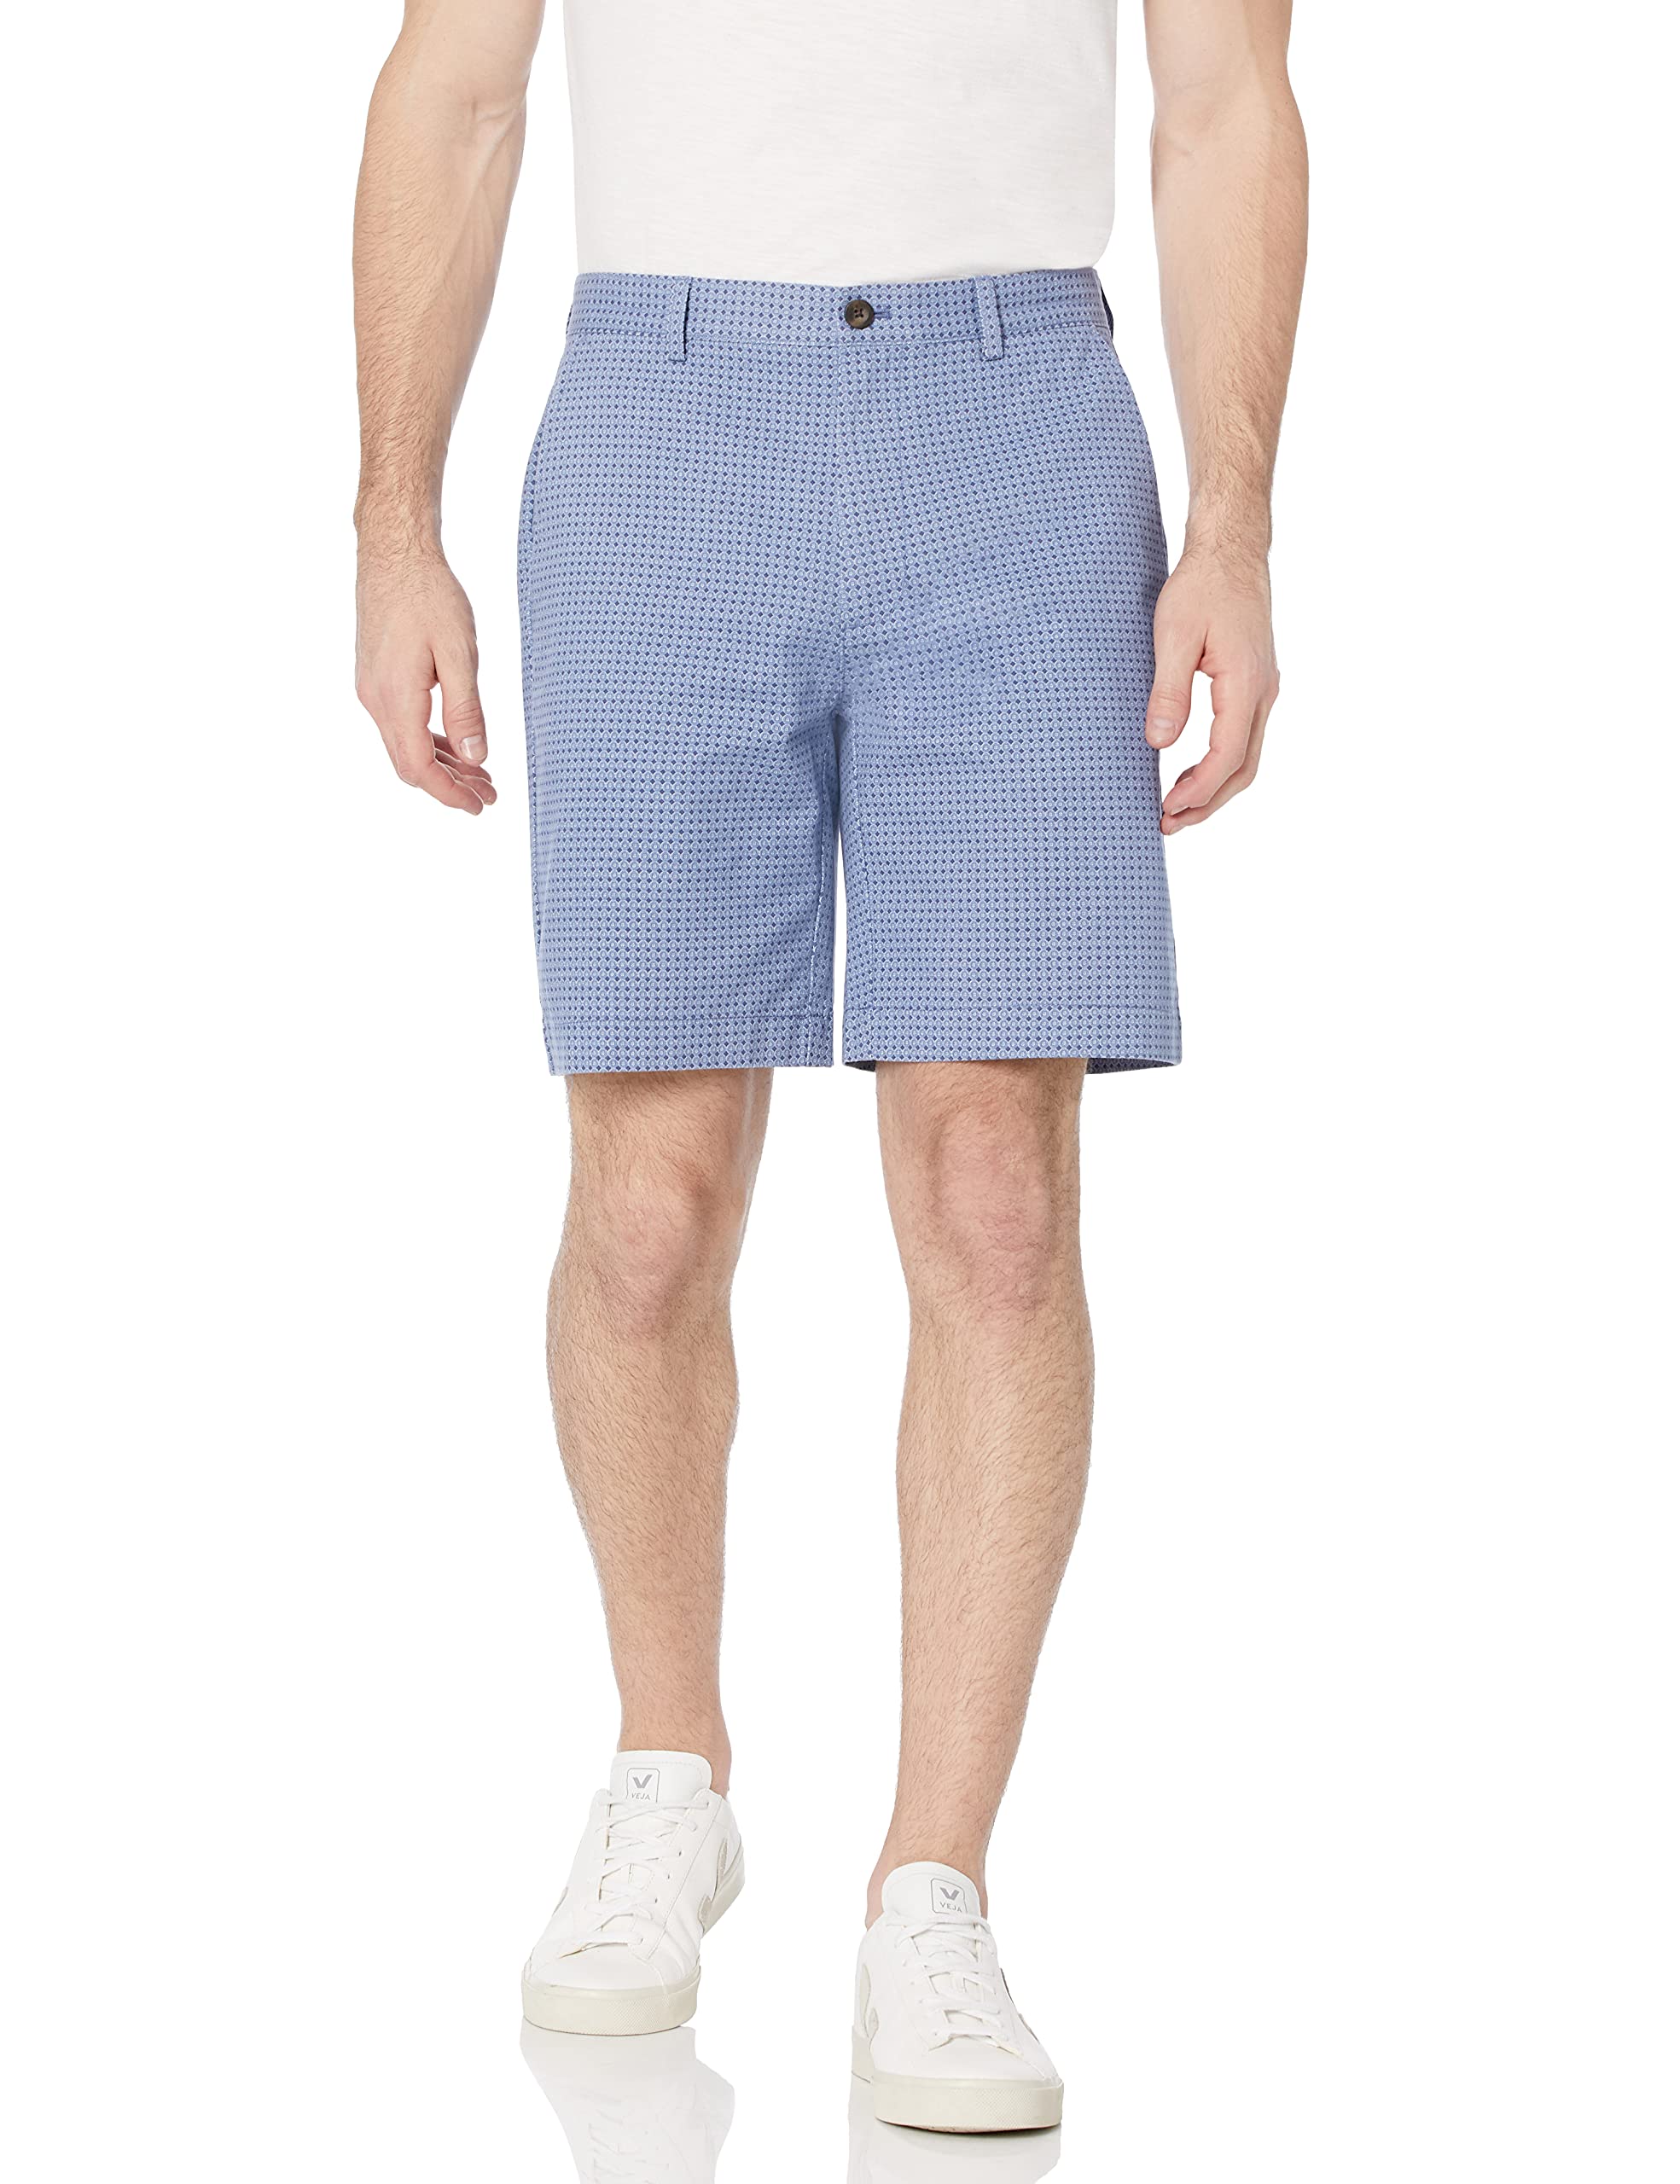 Amazon Essentials Men's 100% Cotton Classic-Fit 9" Short (Various Colors) from $10.90 + Free Shipping w/ Prime or on $35+